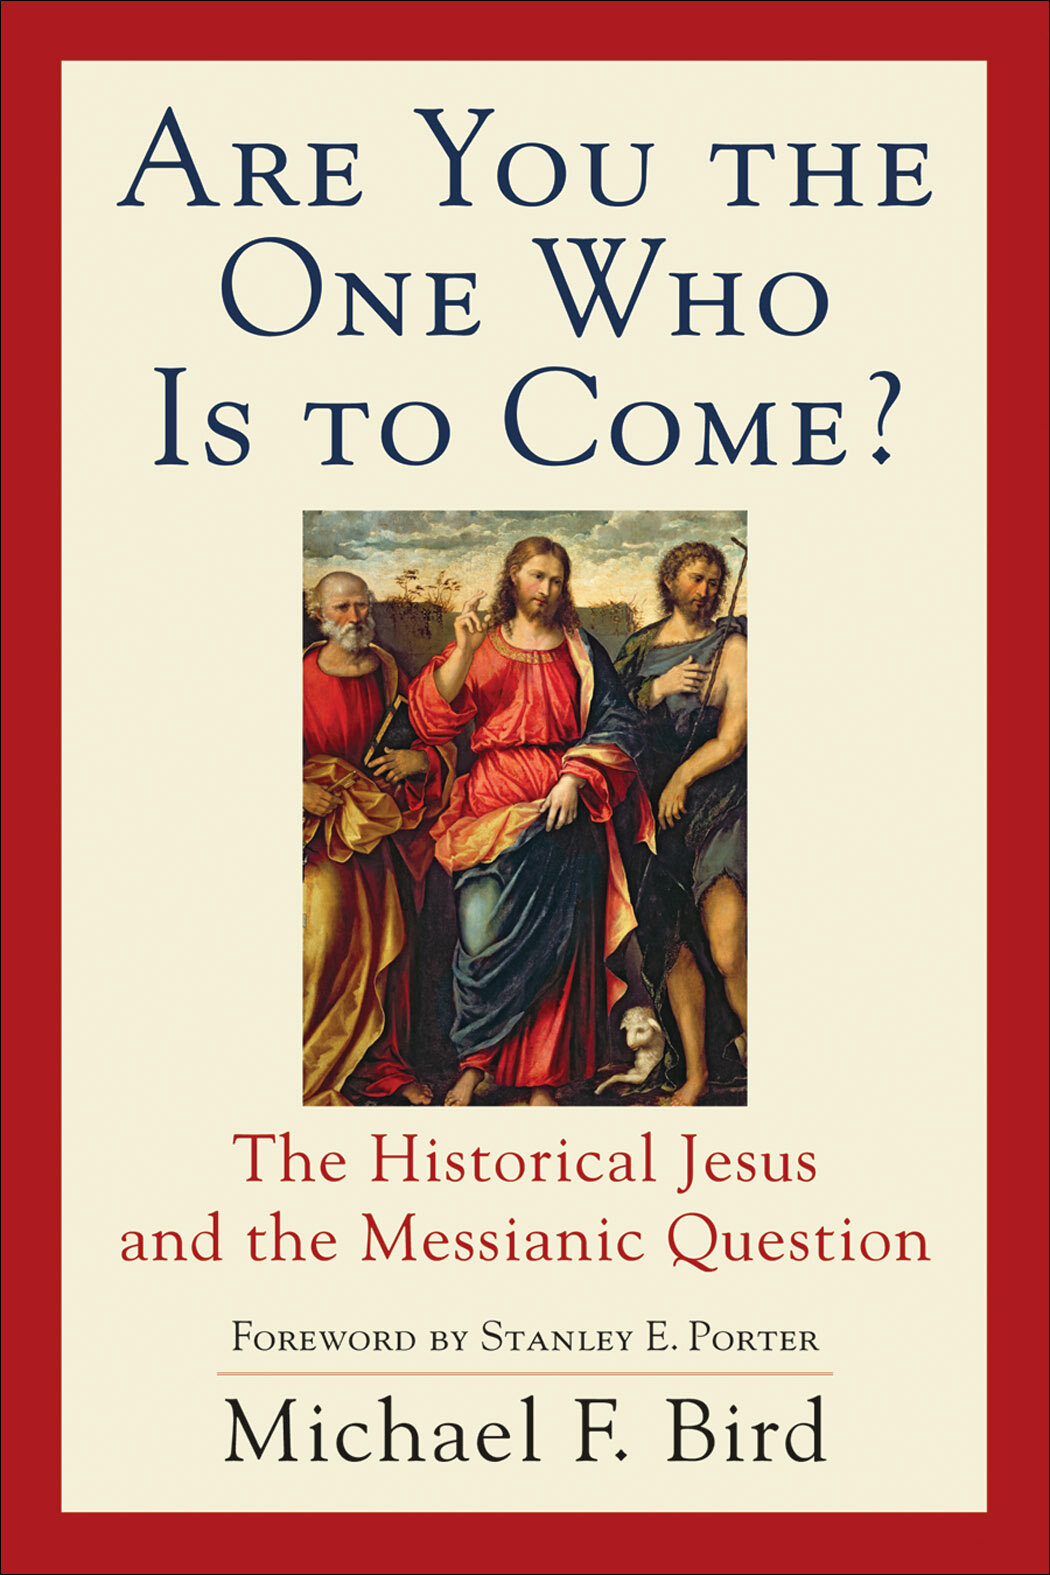 Are You the One Who Is to Come? The Historical Jesus and the Messianic Question